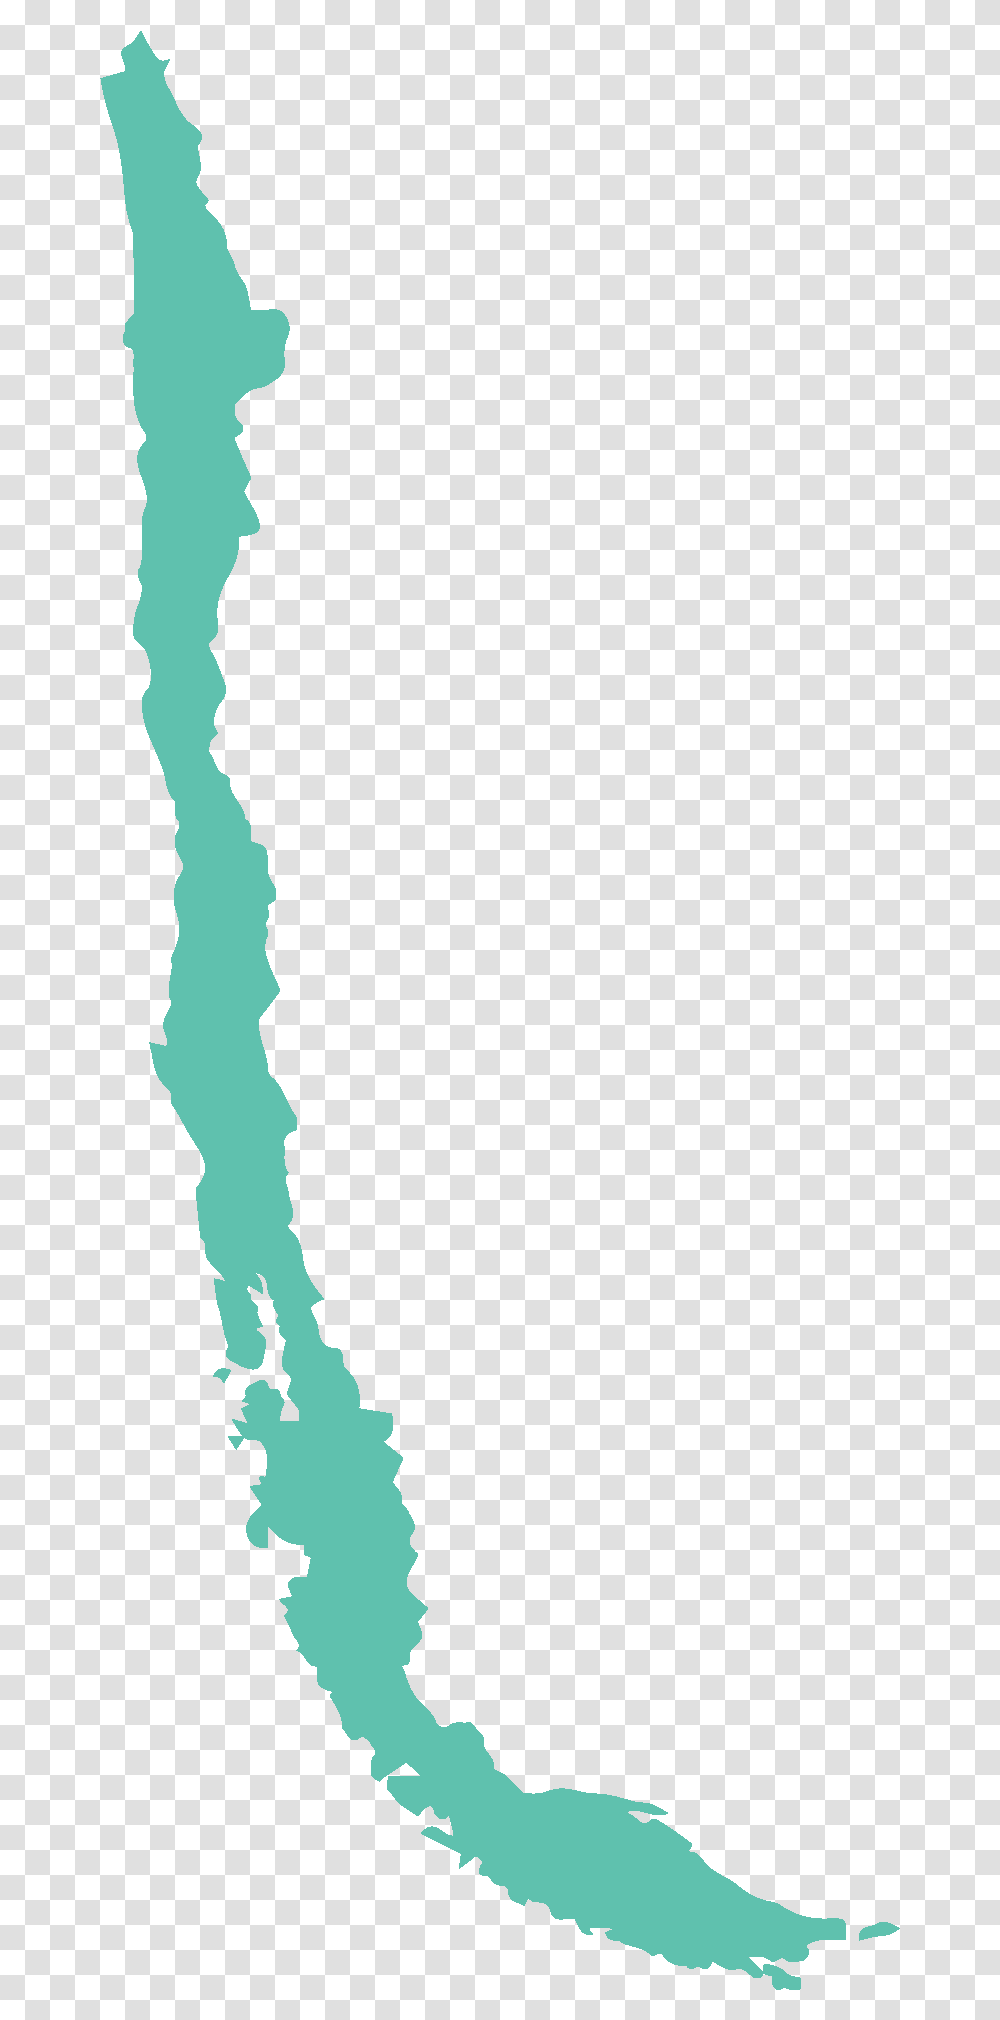 Chile Flag Or Country, Outdoors, Sea, Water, Nature Transparent Png